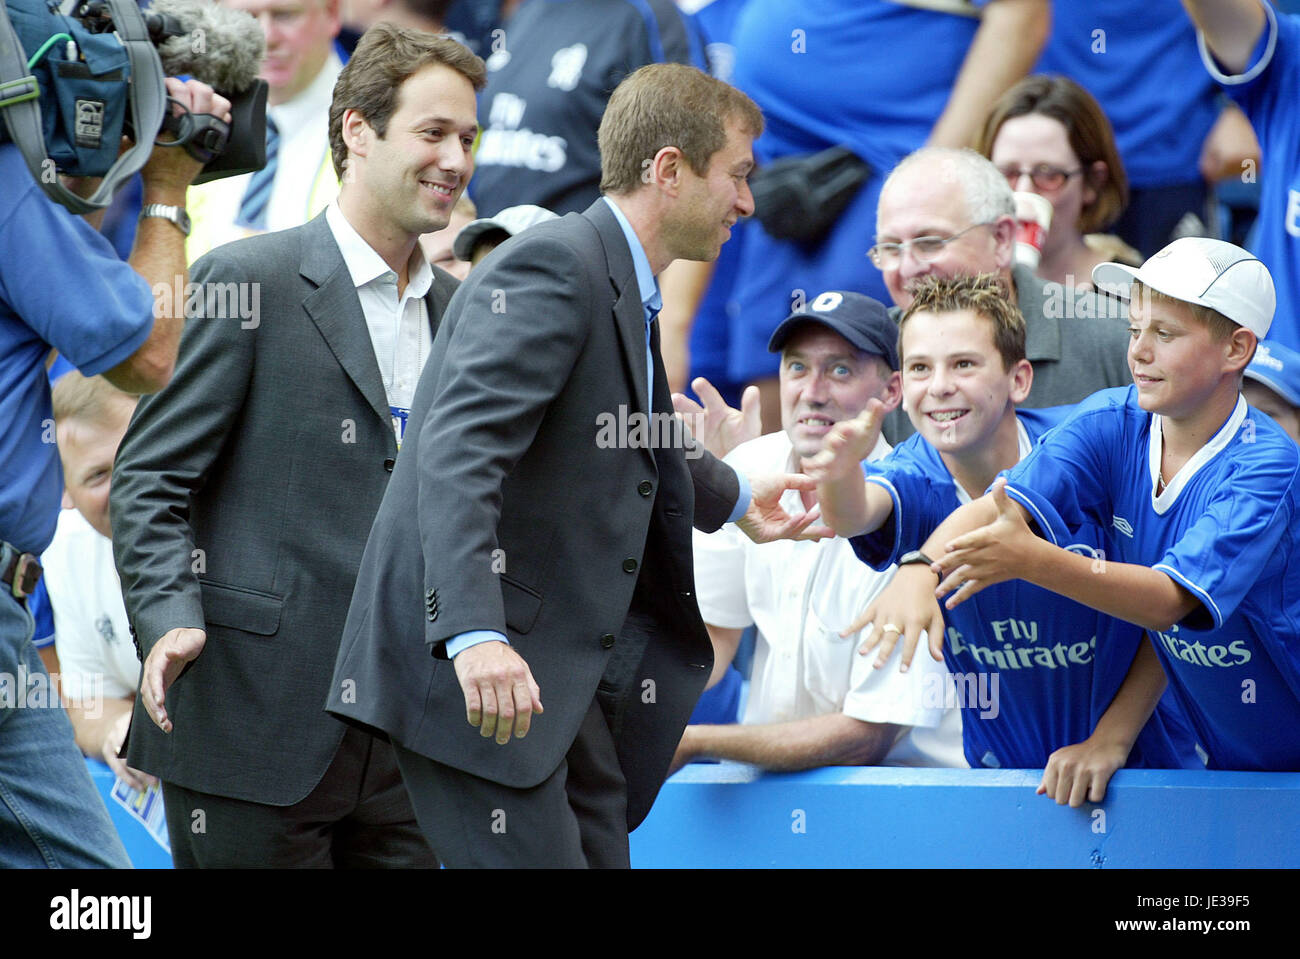 ROMAN ABRAMOVICH GREETS FANS CHELSEA V LEICESTER CITY FC STAMFORD BRIDGE CHELSEA LONDON ENGLAND 23 August 2003 Stock Photo